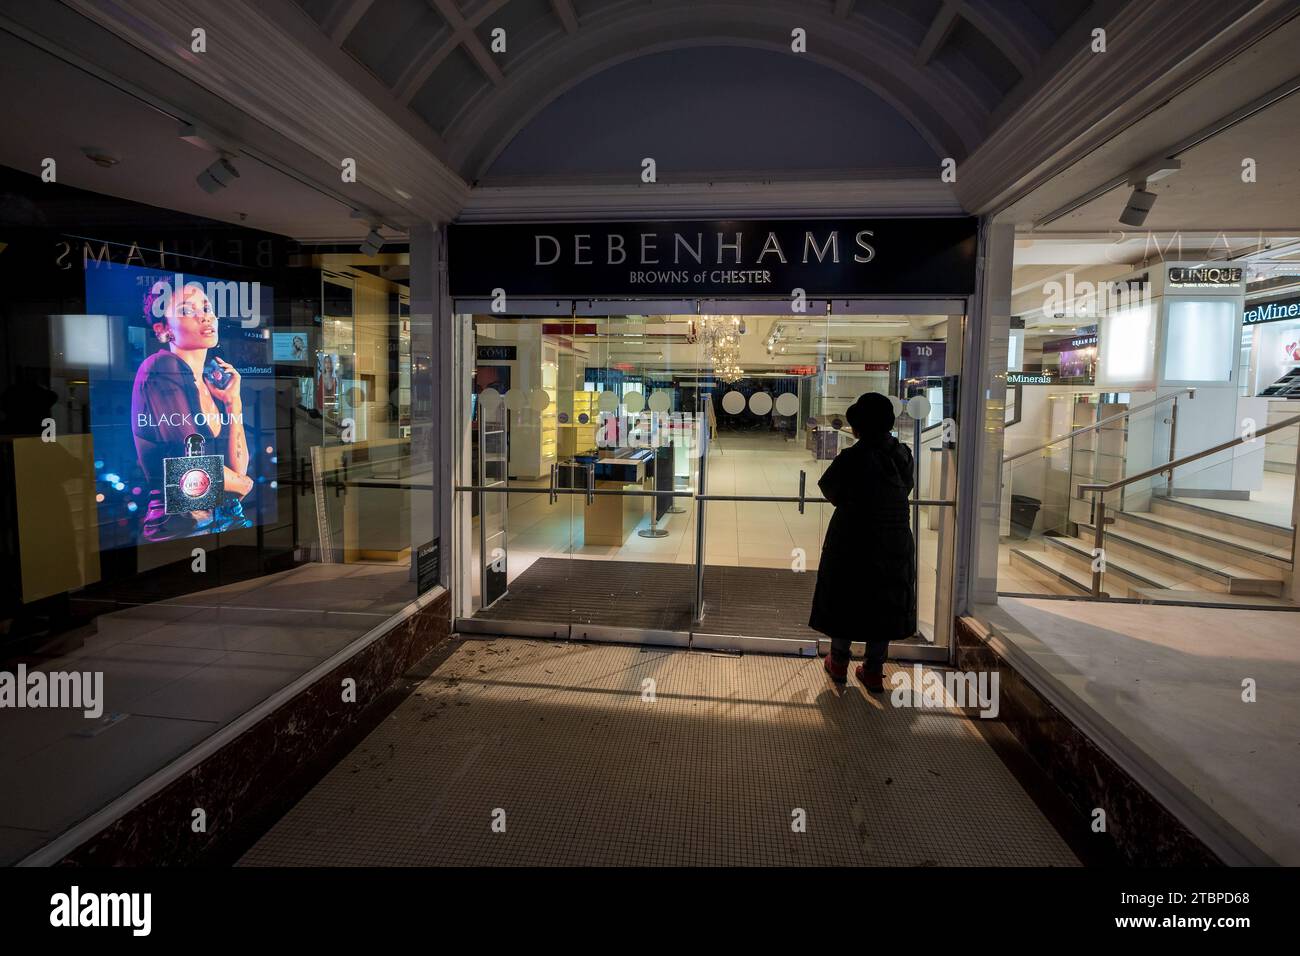 The closed Debenhams department store Browns of Chester in the rows looking desolate. An indicator of the retail crisis caused by the Covid pandemic. Stock Photo